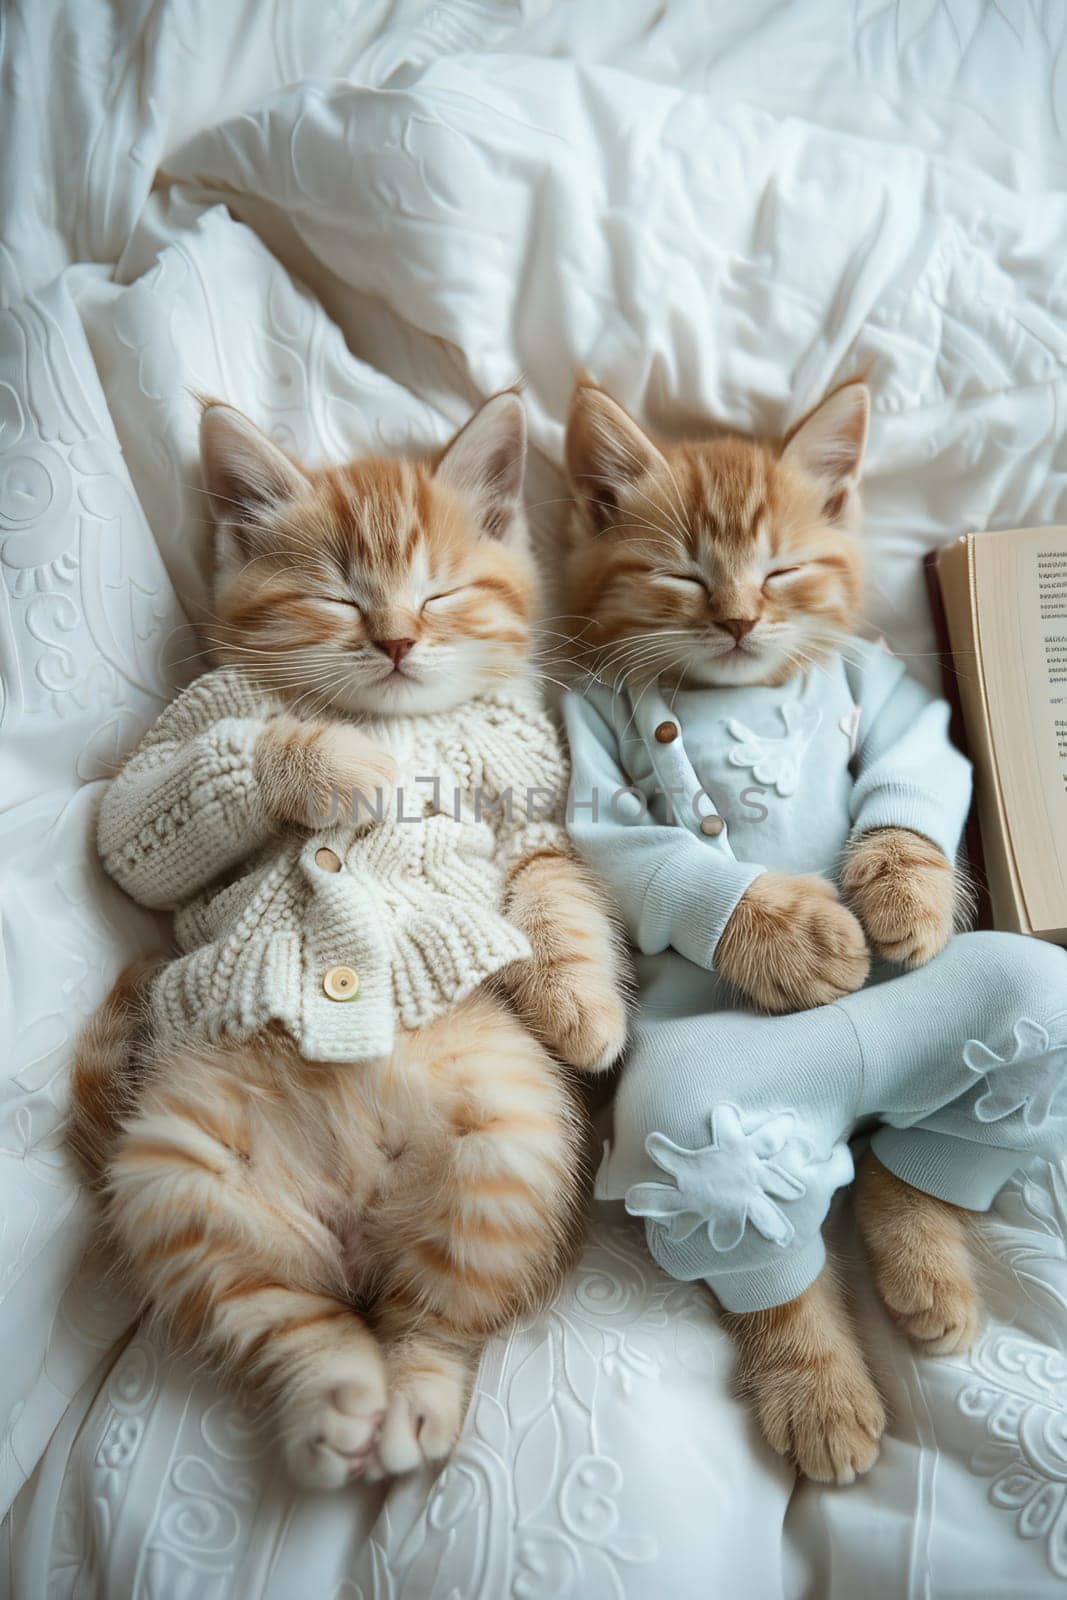 Two orange kittens are sleeping on a bed with a blue blanket. One of the kittens is wearing a blue shirt